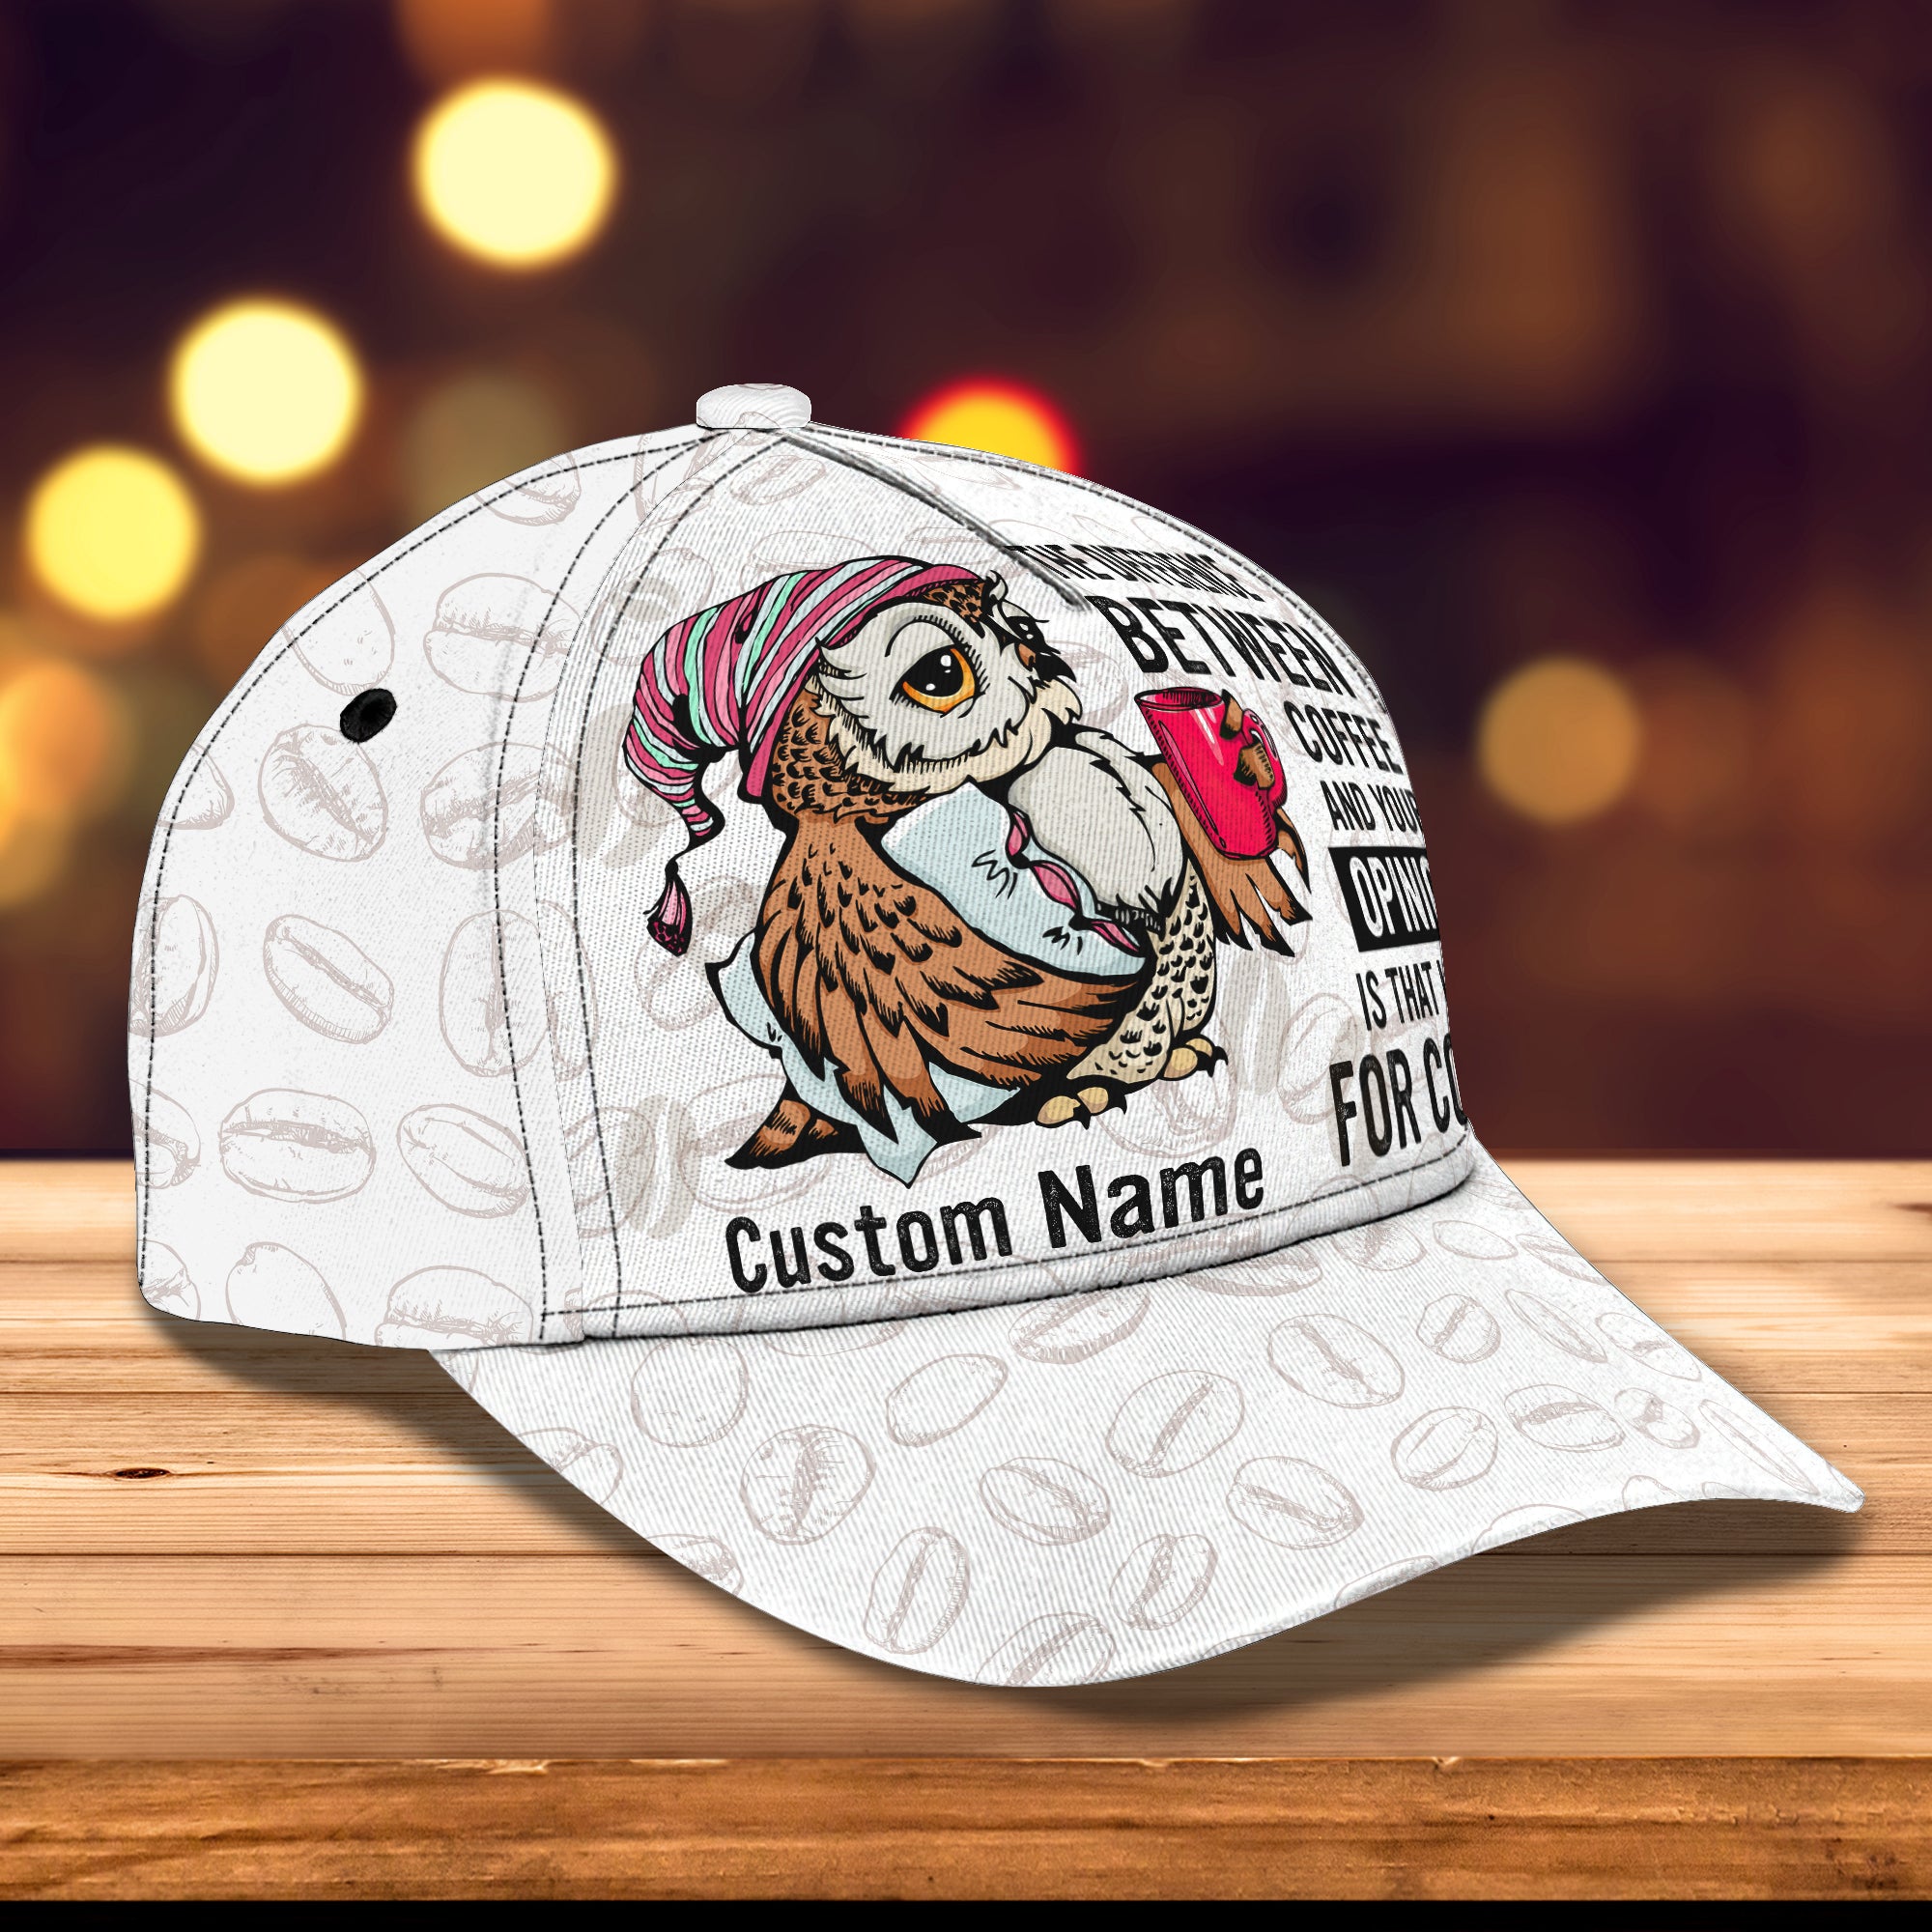 I Asked For Coffe- Personalized Name Cap -Loop- T2k- 172